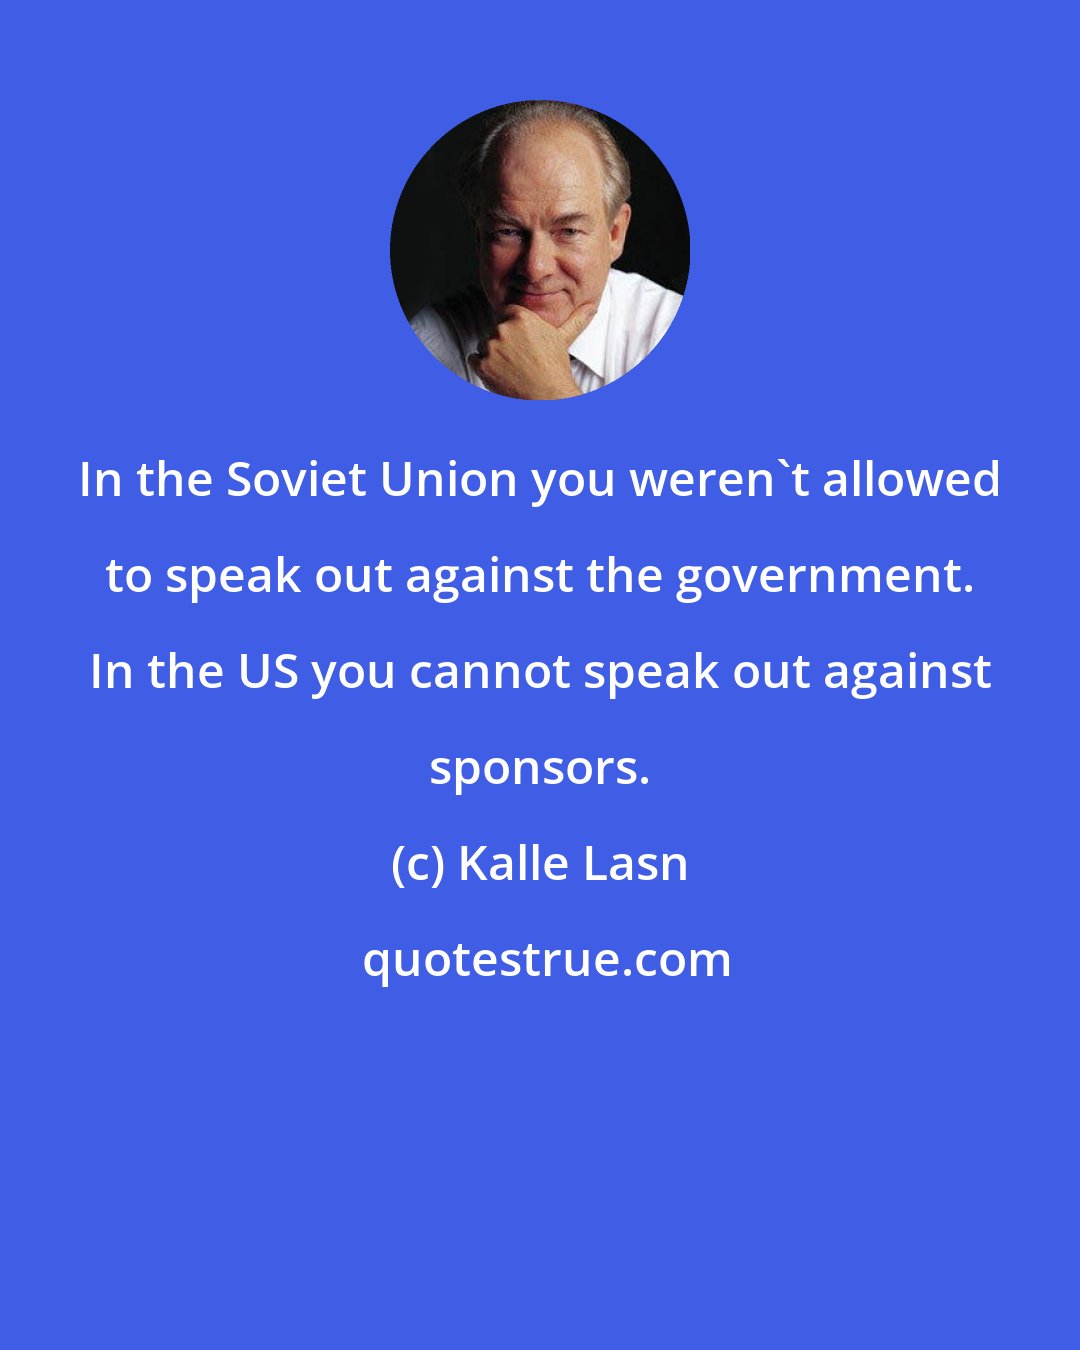 Kalle Lasn: In the Soviet Union you weren't allowed to speak out against the government. In the US you cannot speak out against sponsors.